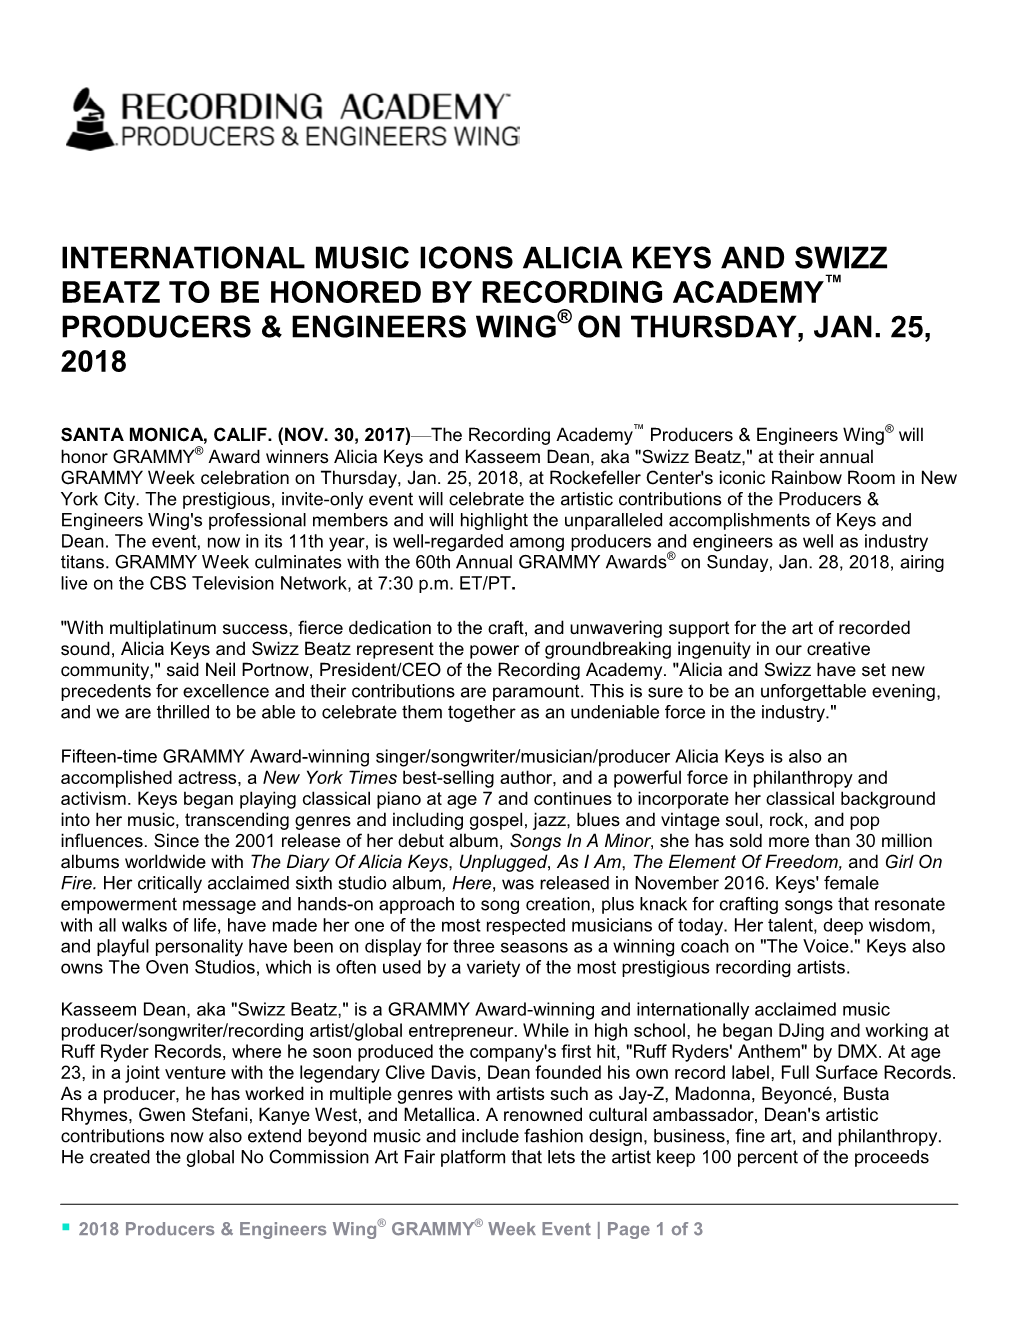 International Music Icons Alicia Keys and Swizz Beatz to Be Honored by Recording Academy Producers & Engineers Wing on Thurs